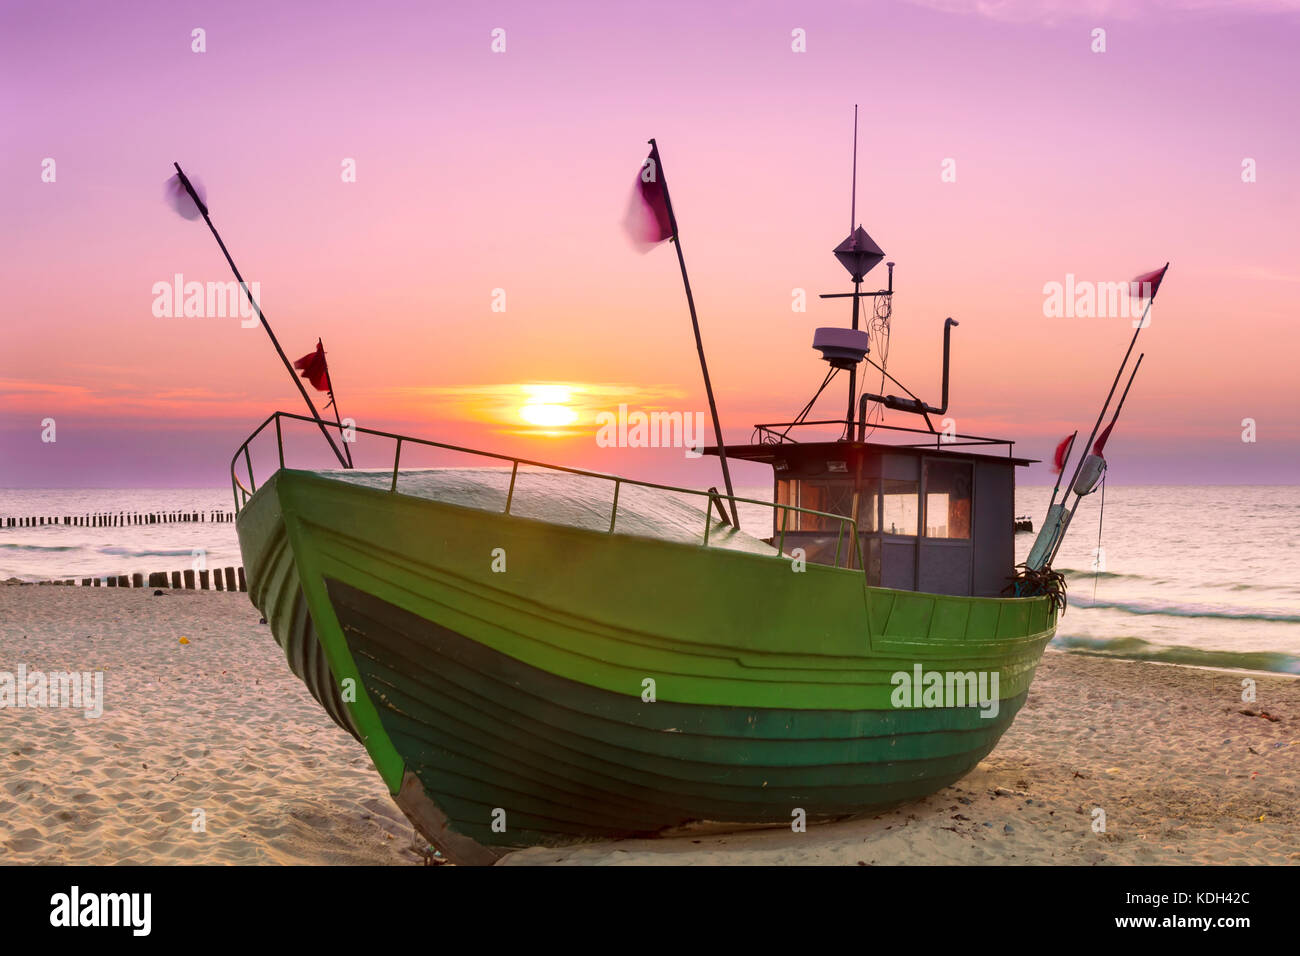 Sights of Poland. Sunset at Baltic sea with fishing boats. Stock Photo